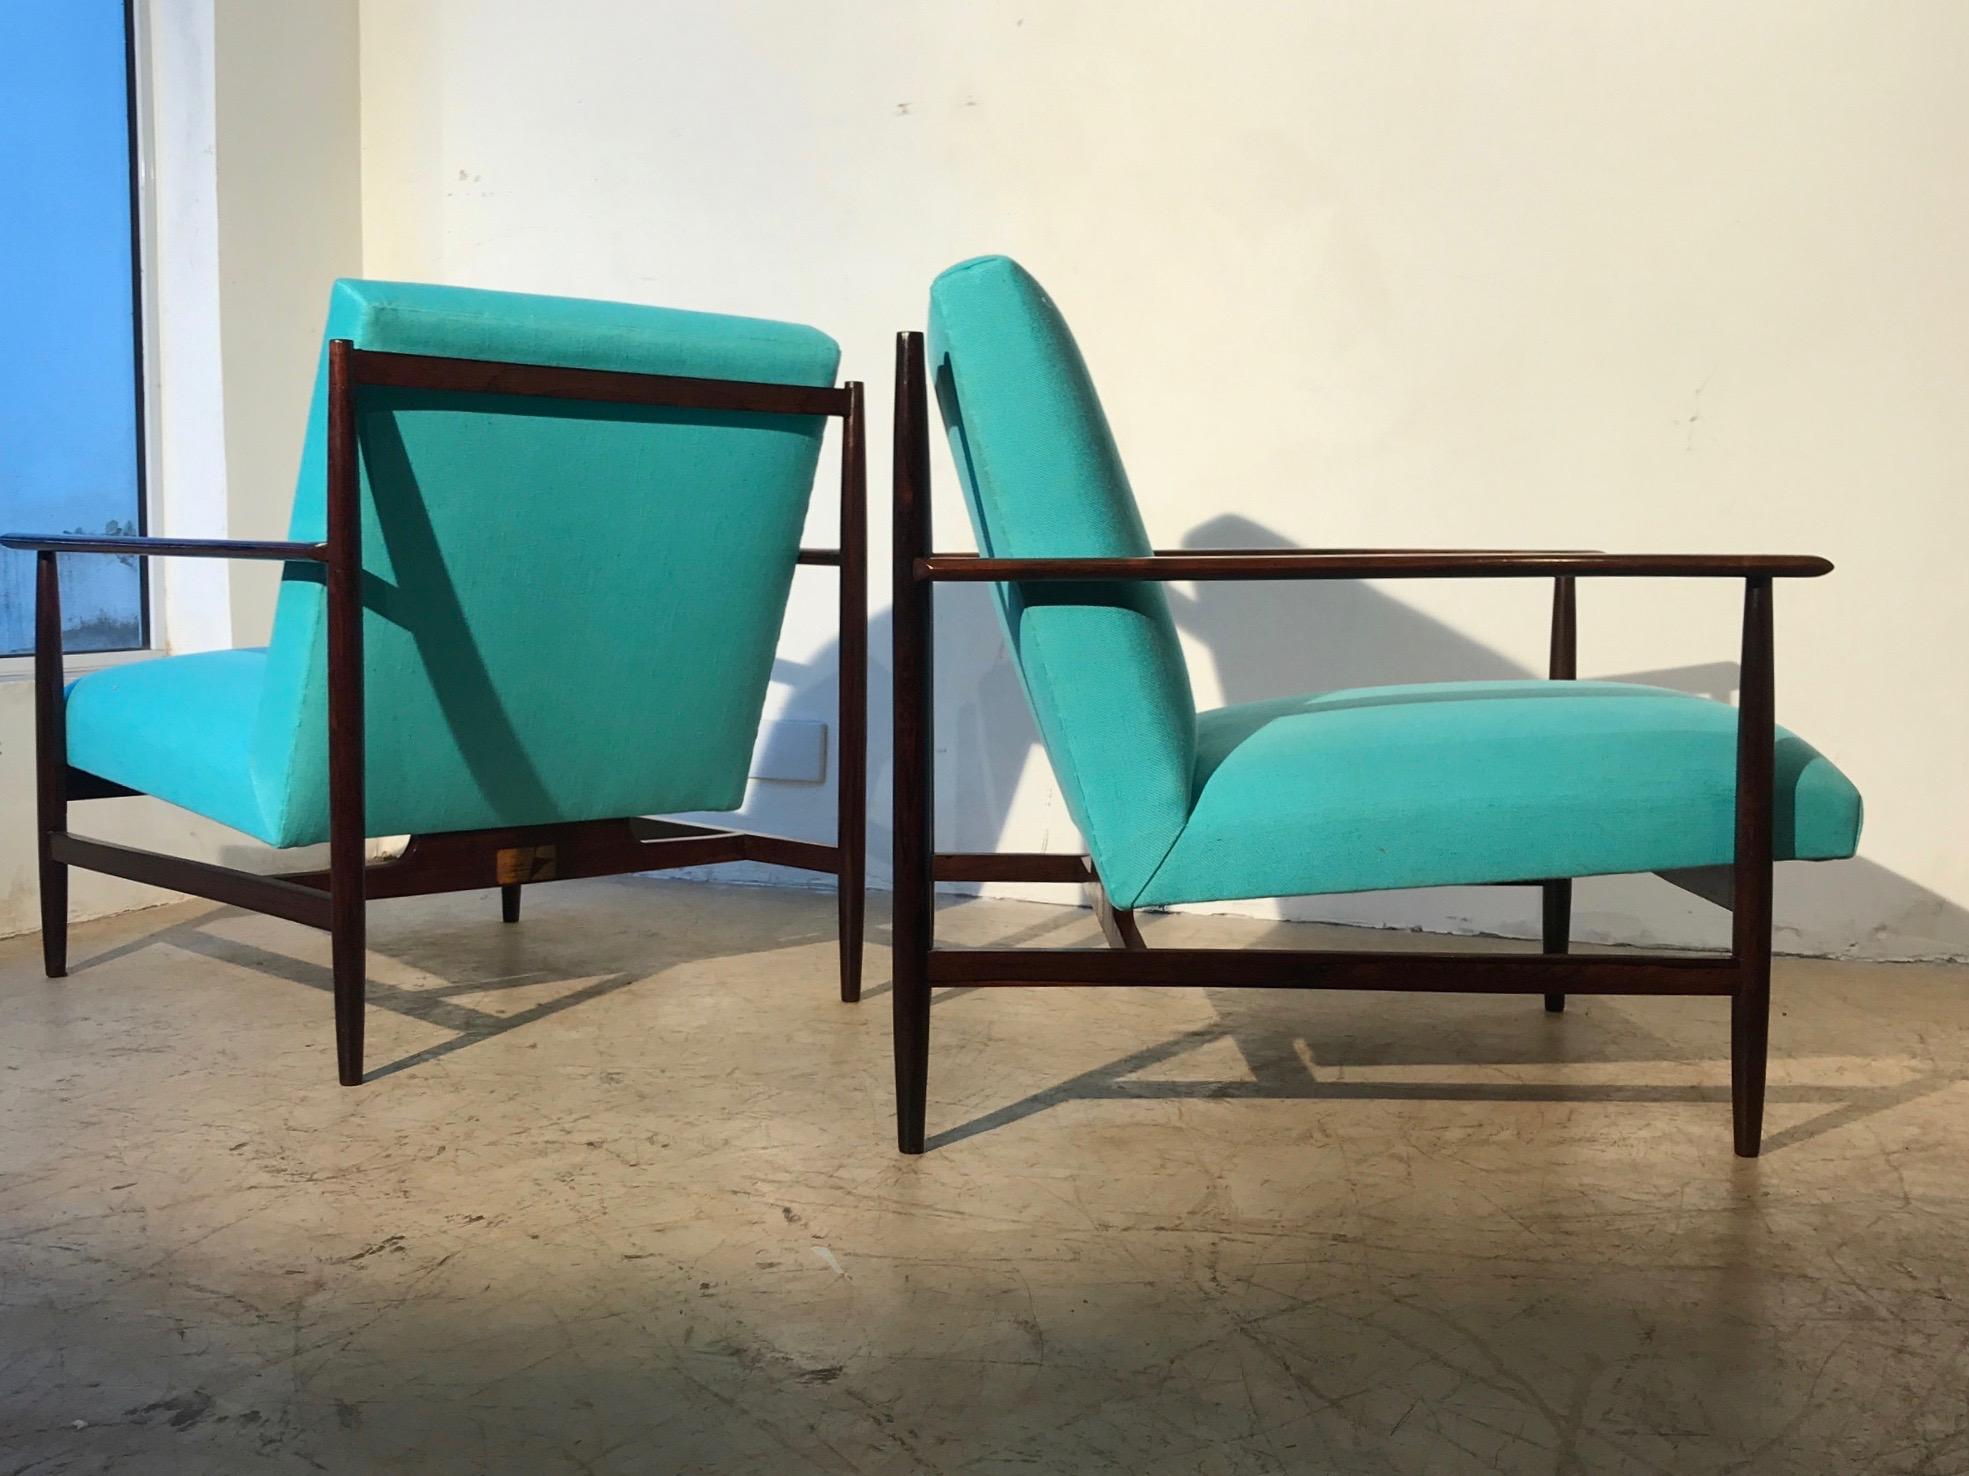 Joaquin Tenreiro attributed. Pair of Brazilian modern armchair made of solid rosewood with blue upholstery covering. This chairs structures features an extremely sophisticated wooden finishing with amazing rosewood patterns.

Currently only